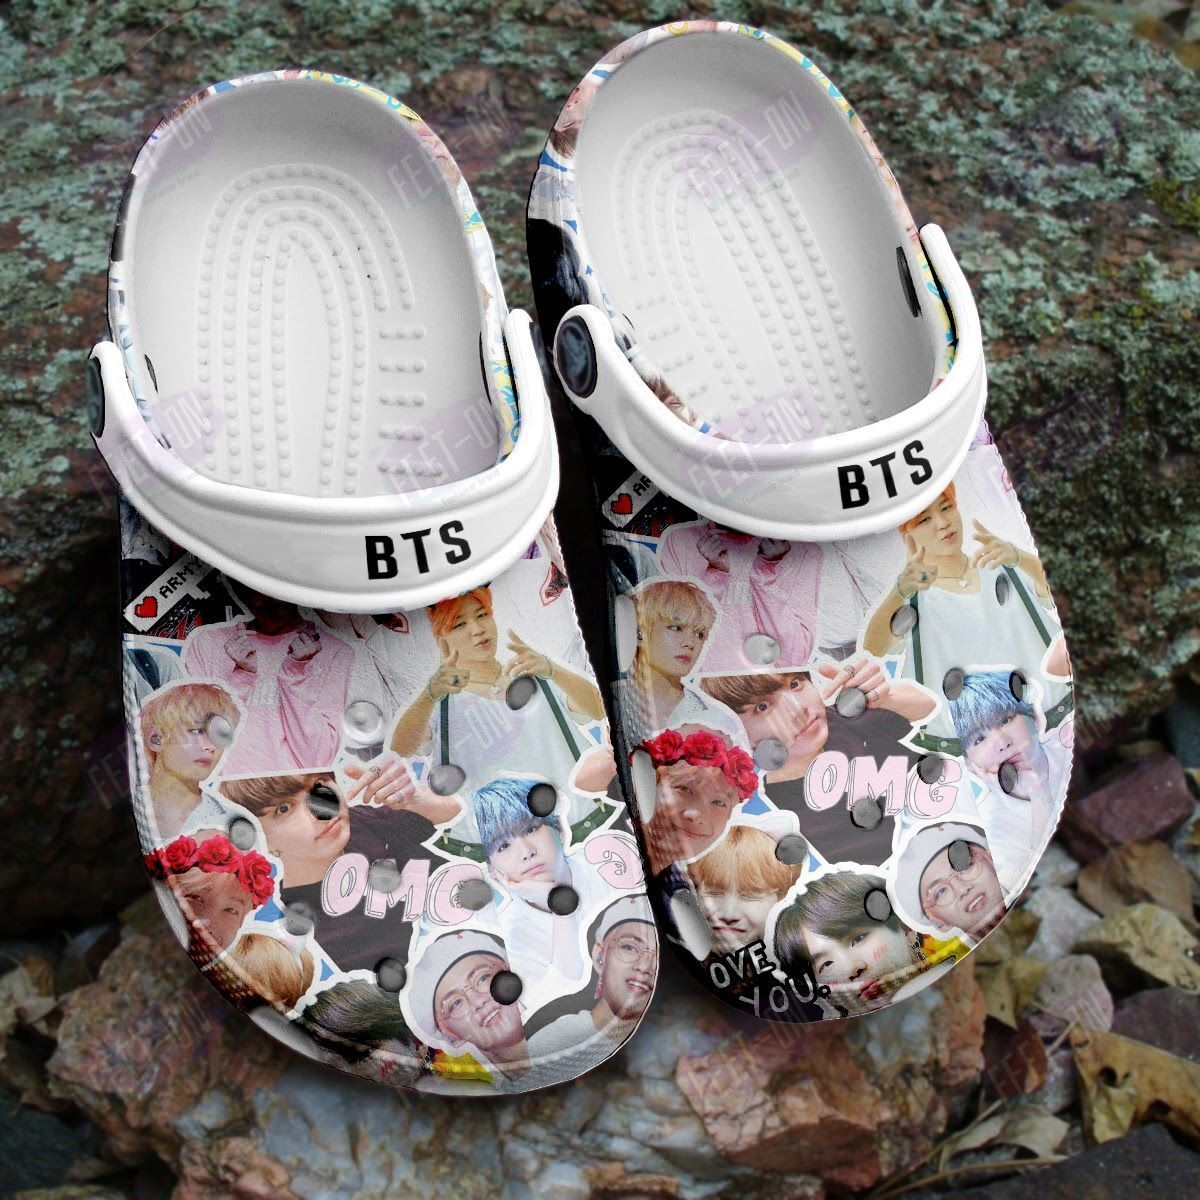 BEST BTS Members picture OMG crocband Shoes